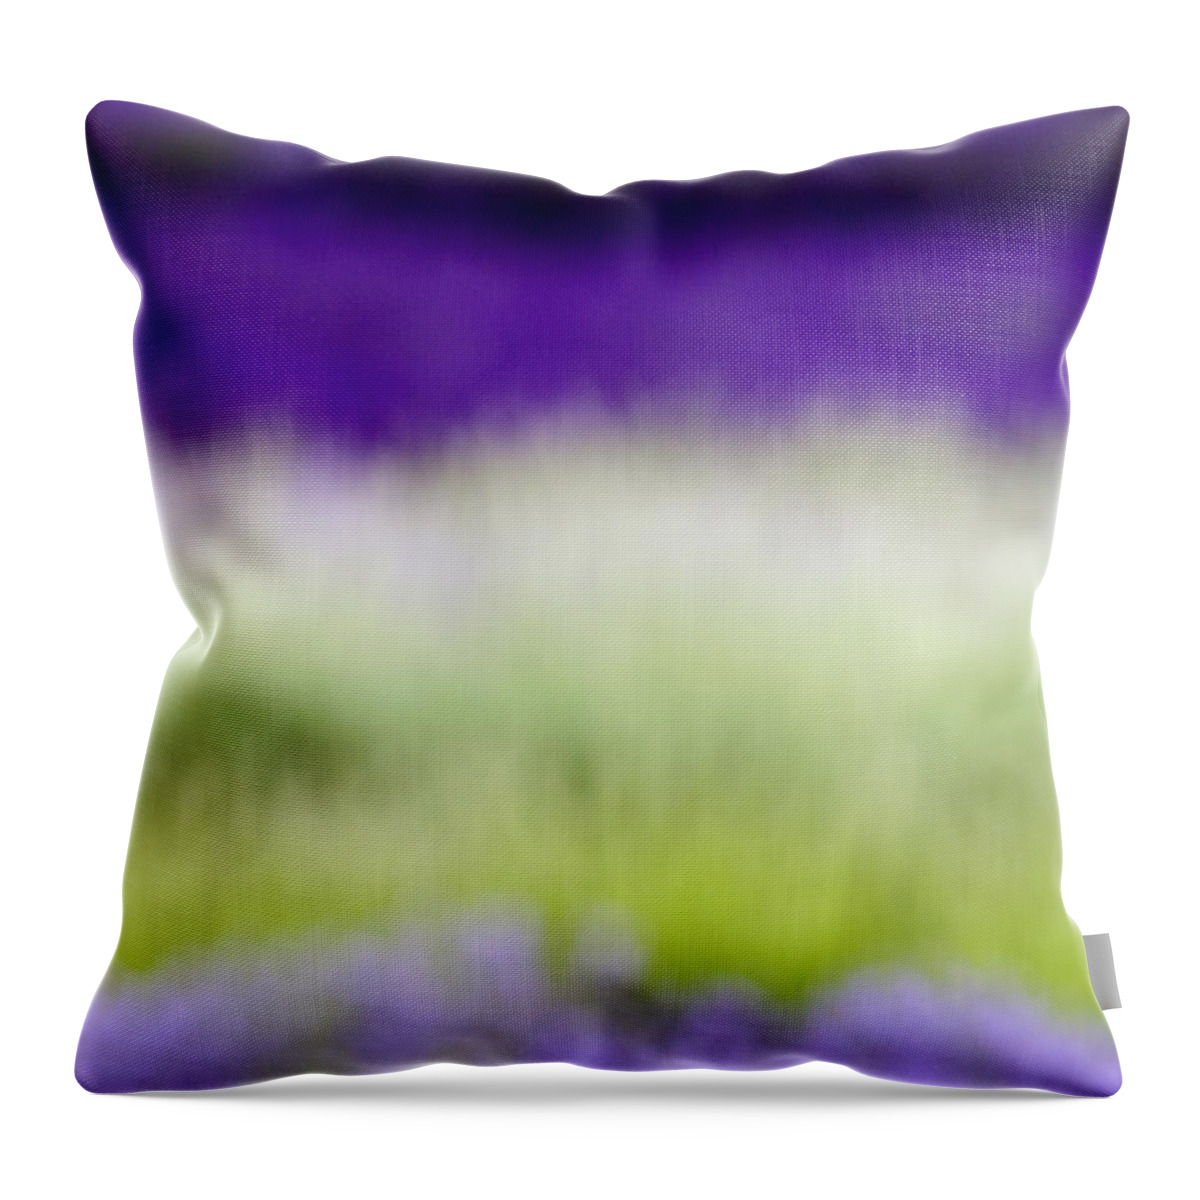 Lavender Throw Pillow featuring the photograph Soft Shades of Lavender by Tim Gainey